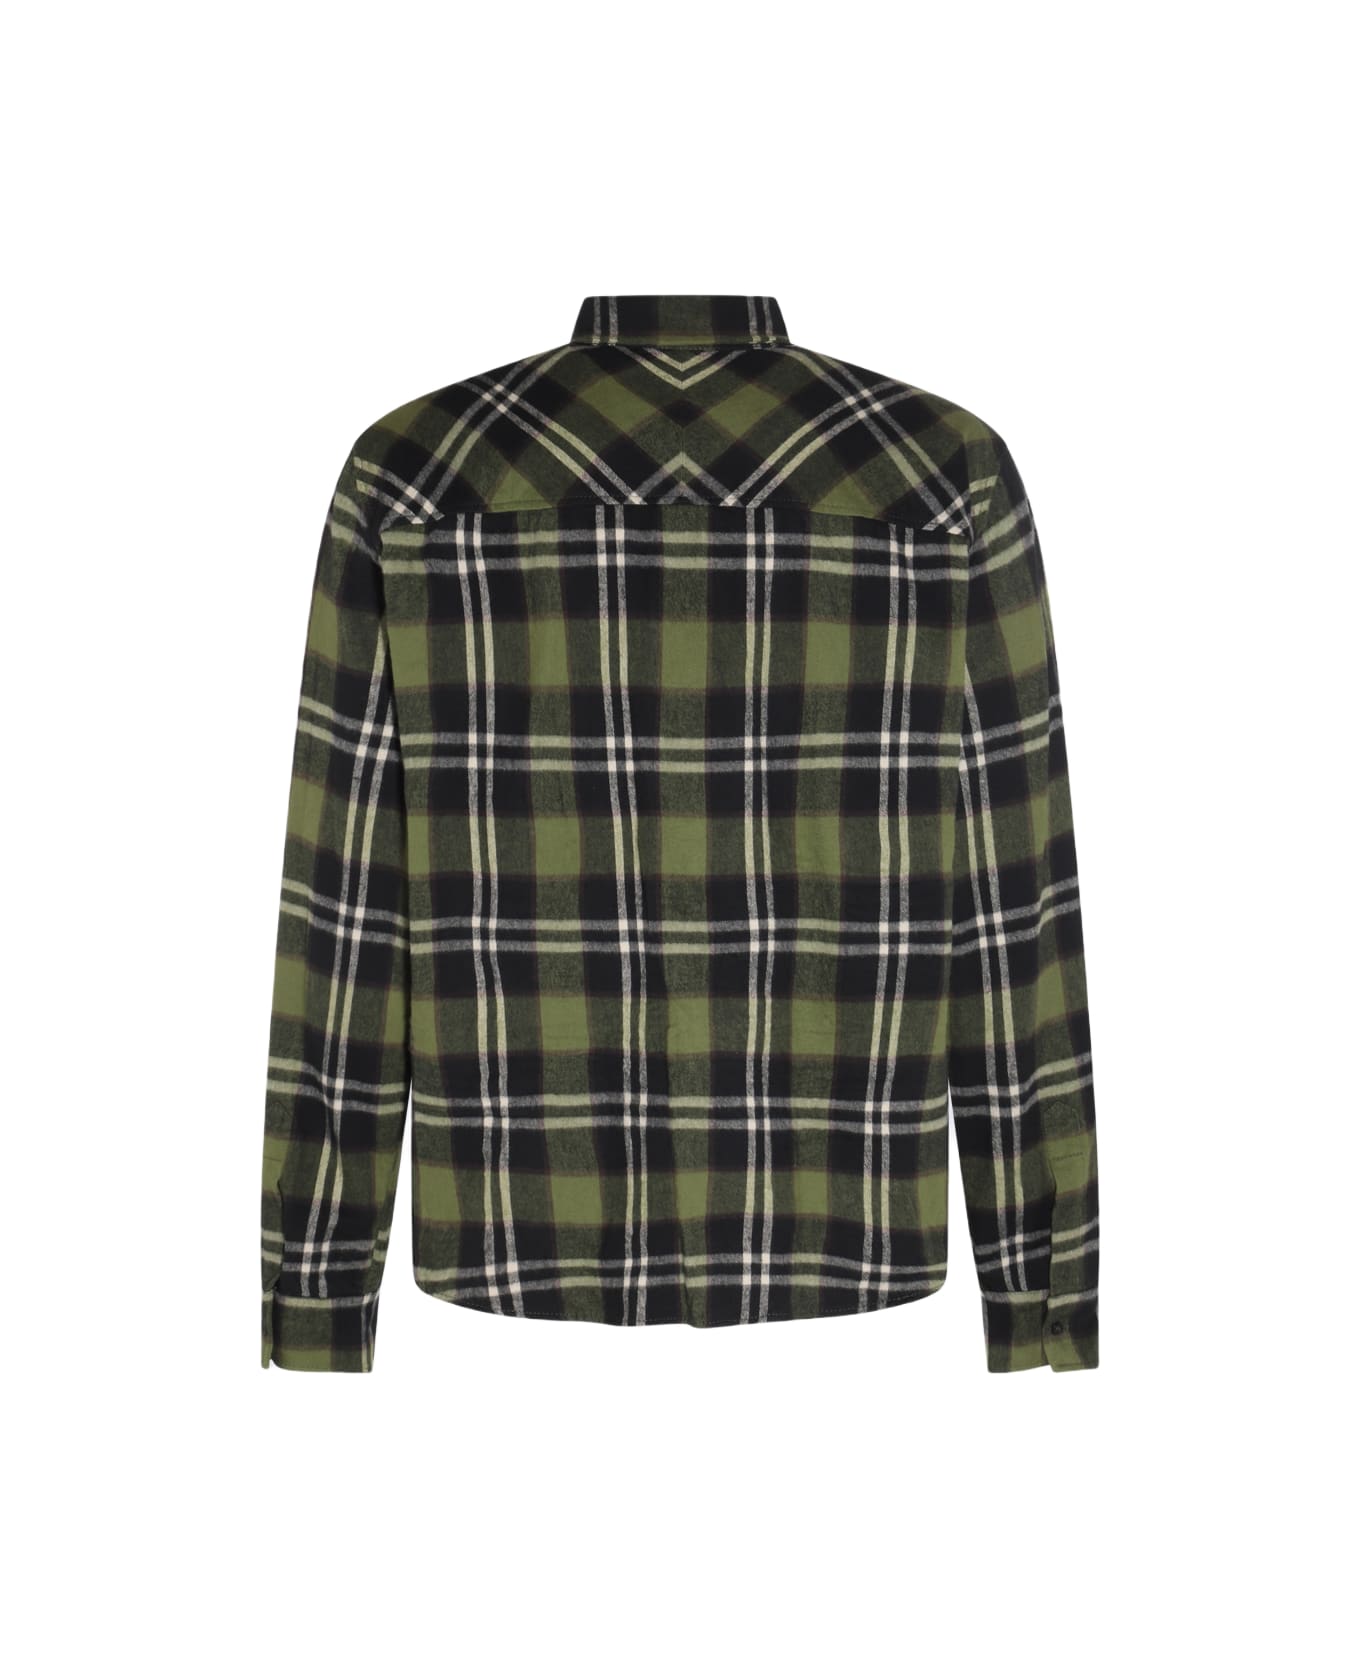 Dsquared2 Green And Brown Cotton Plaid Print Flannel Shirt - Green/Brown